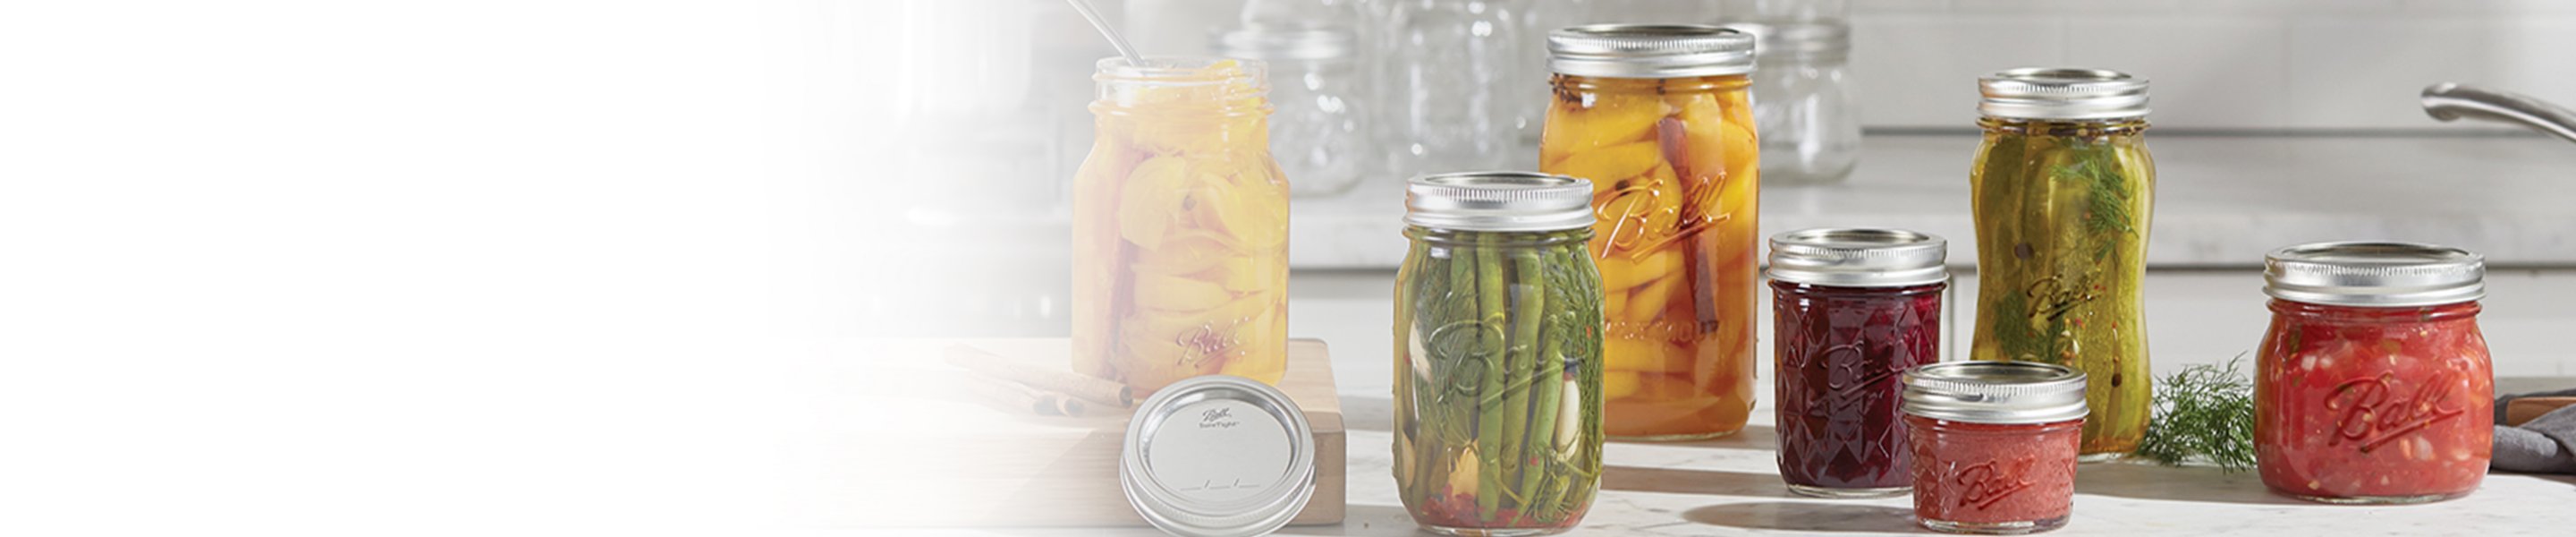 ball canning jars on counter